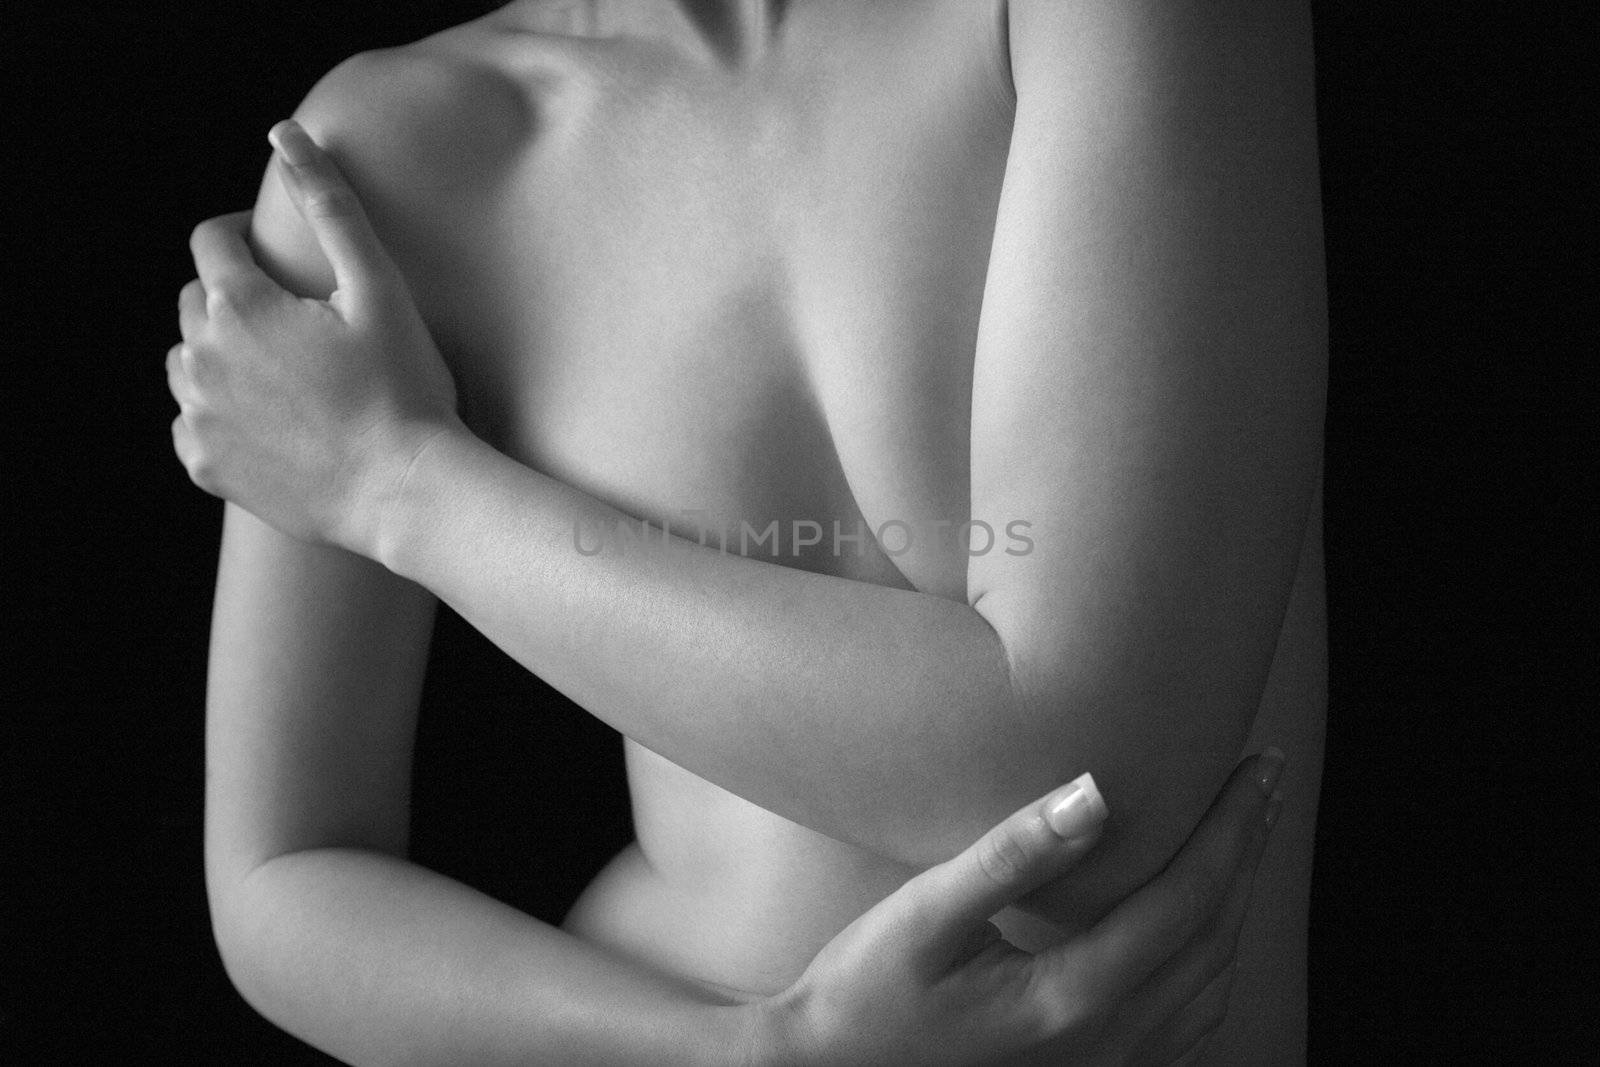 Nude young adult Caucasian female chest and arms.